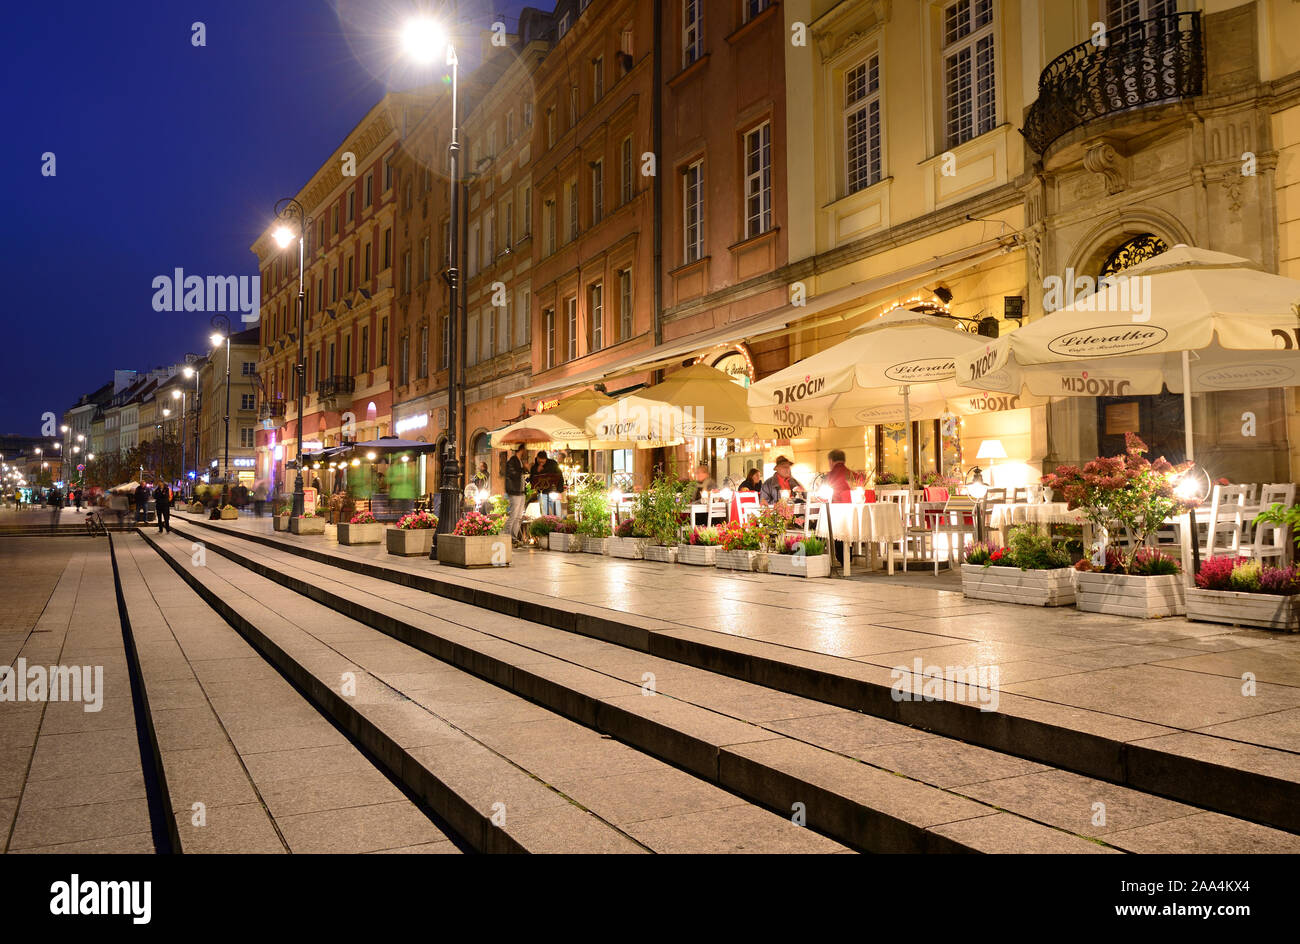 Restaurants in the Old Town (Stare Miasto) in Warsaw, a Unesco World Heritage Site. Poland Stock Photo